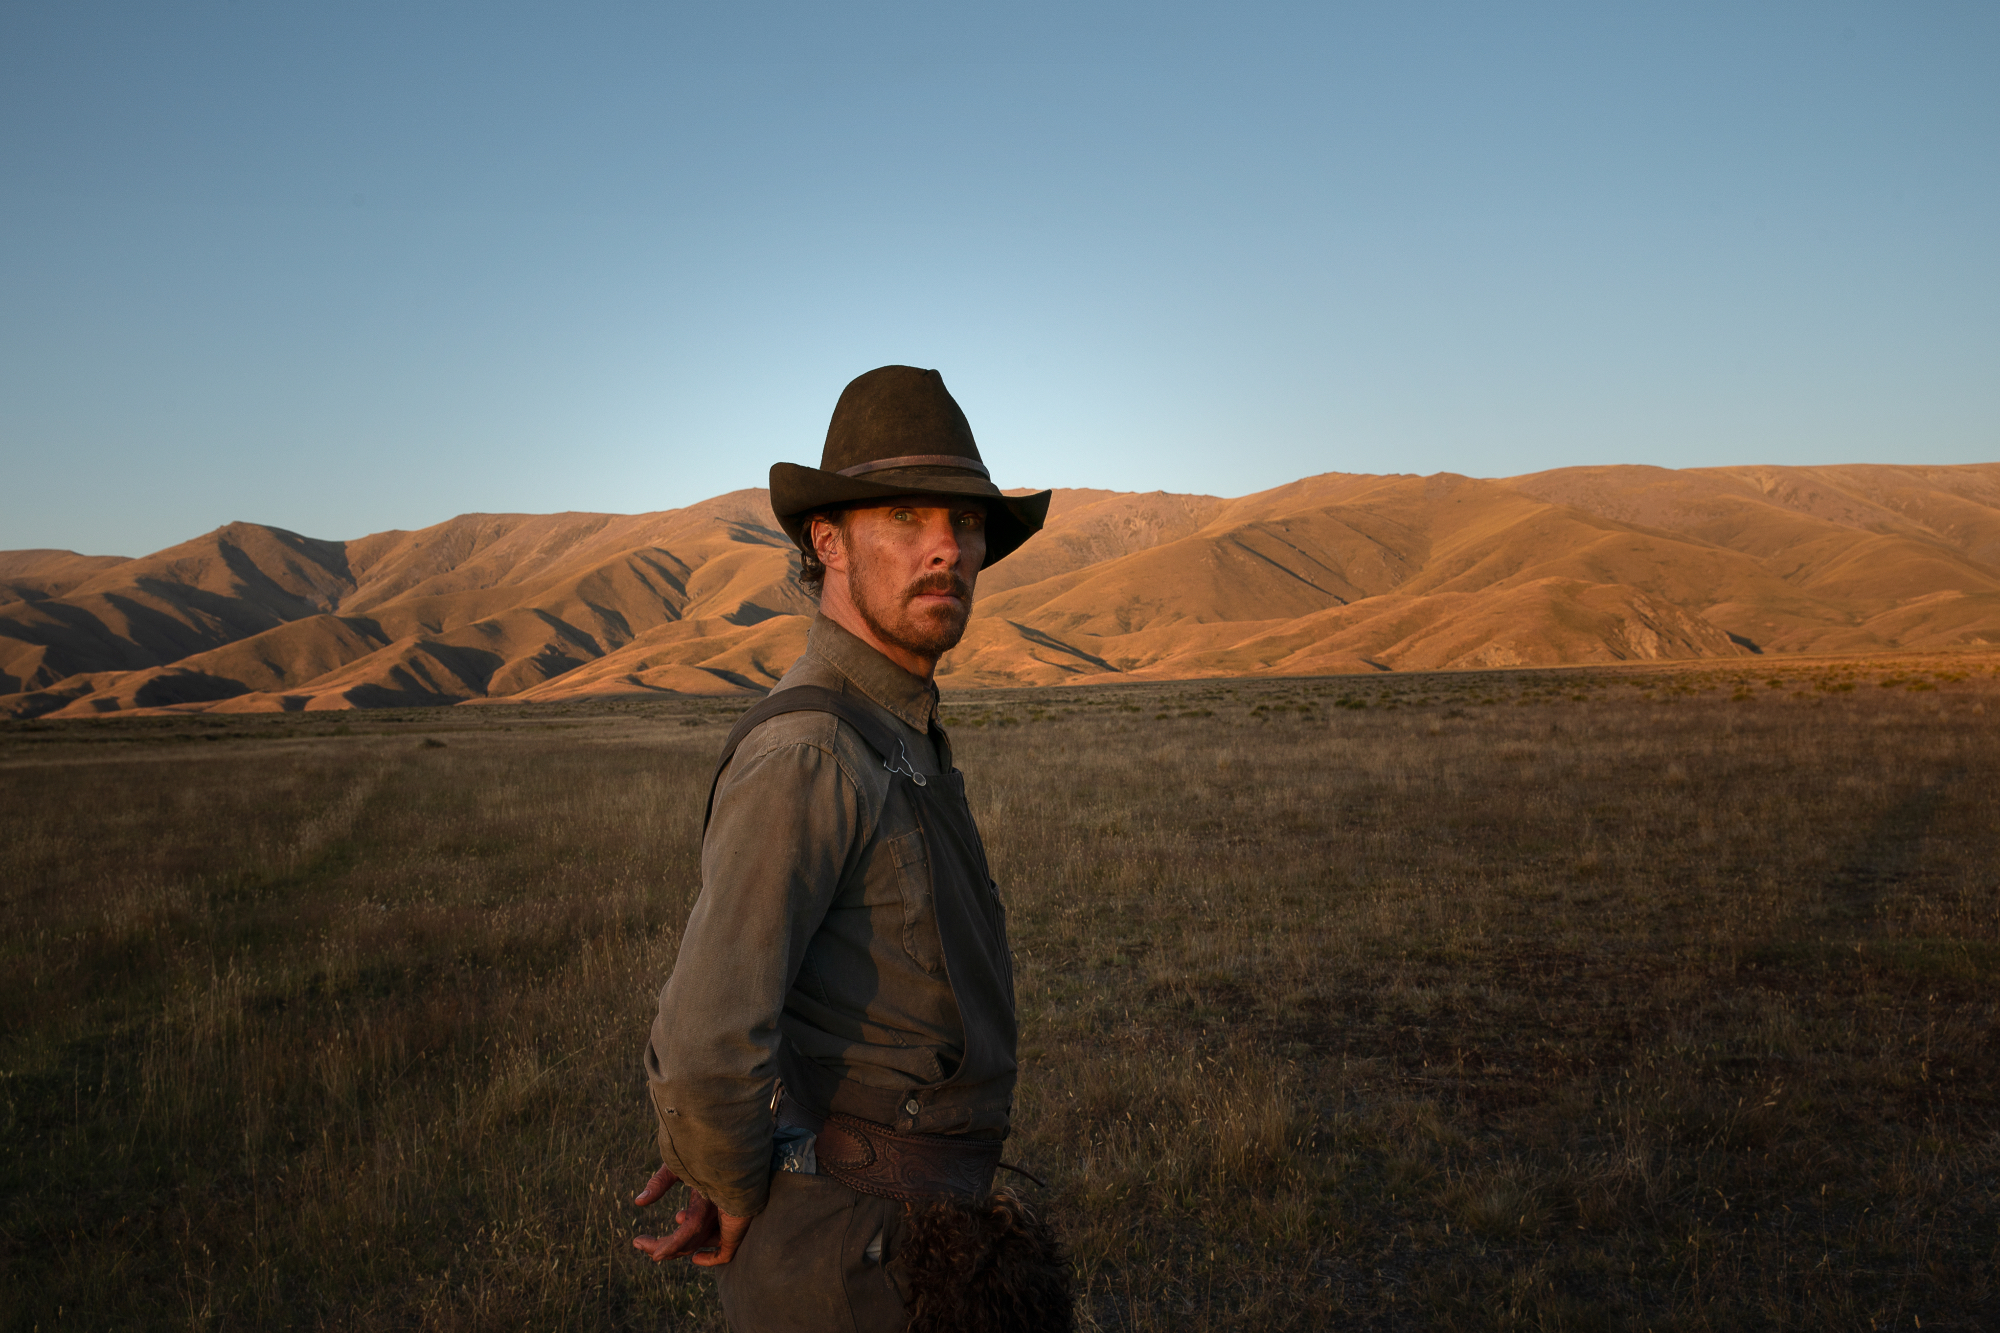 'The Power of the Dog' star Benedict Cumberbatch as Phil Burbank standing in a field in rancher clothes